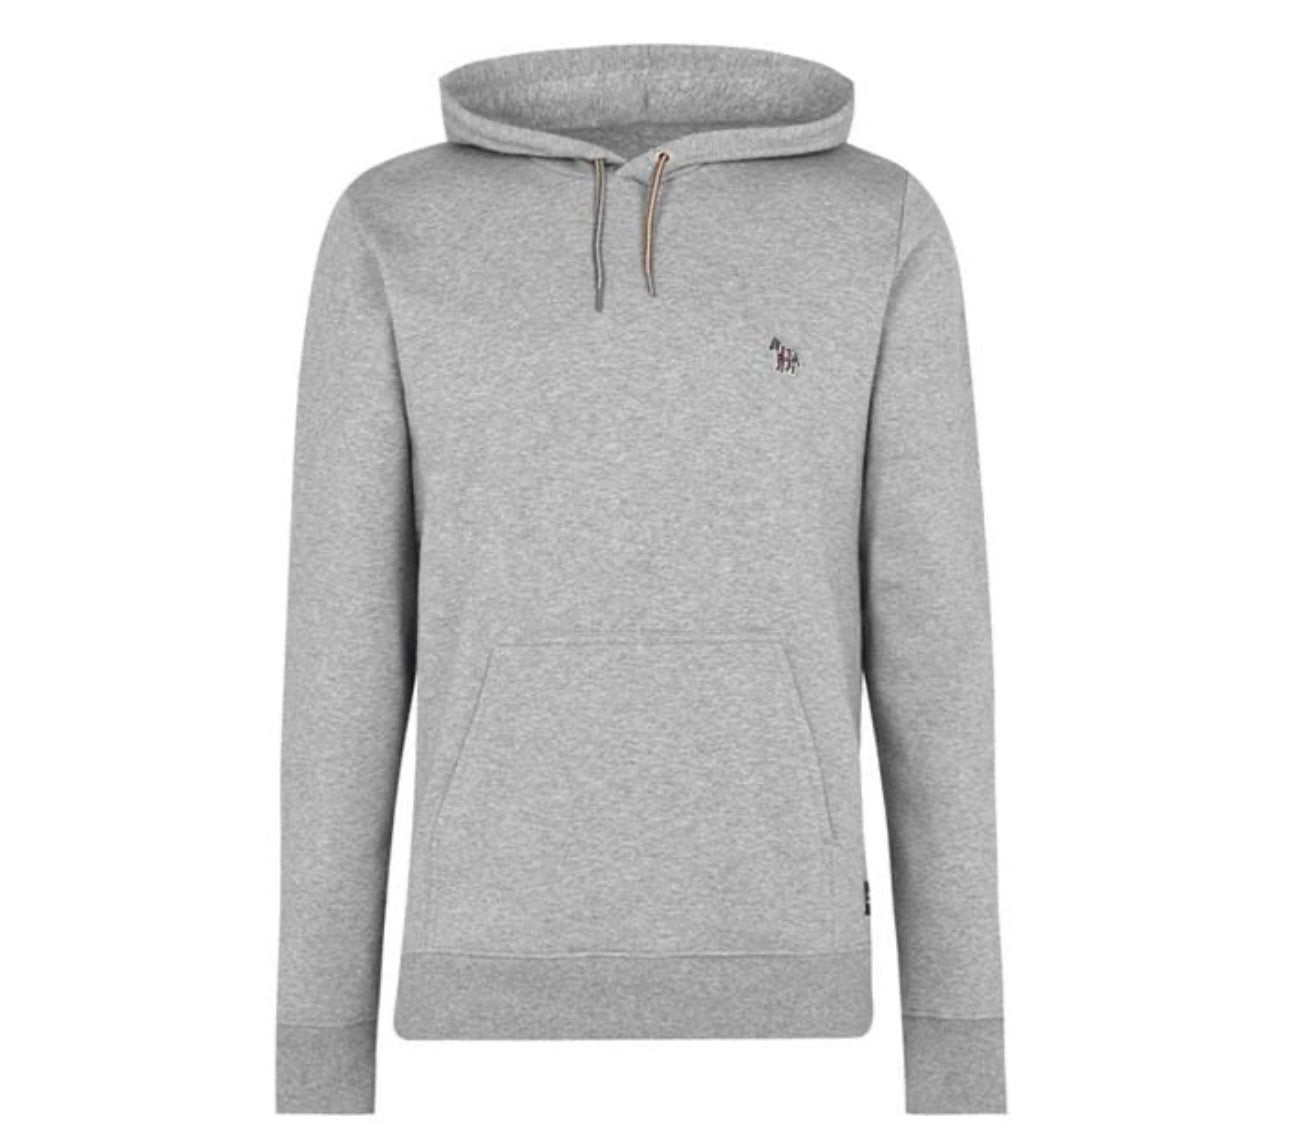 PAUL SMITH EMBROIDERED ZEBRA OTTH HOODIE GREY